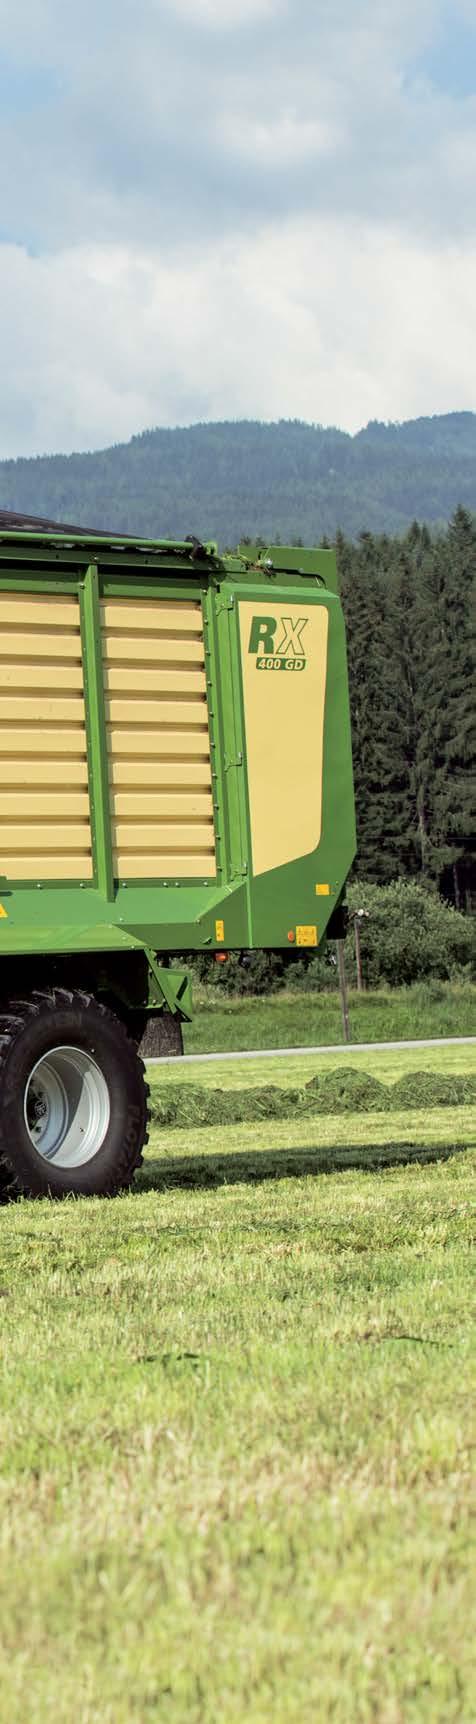 RX self-loading and harvesterfilled forage wagons Full-featured dual-purpose forage wagon Exceptionally wide pick-up and feed rotor Standard 46-blade cutting system Optimized capacity from the